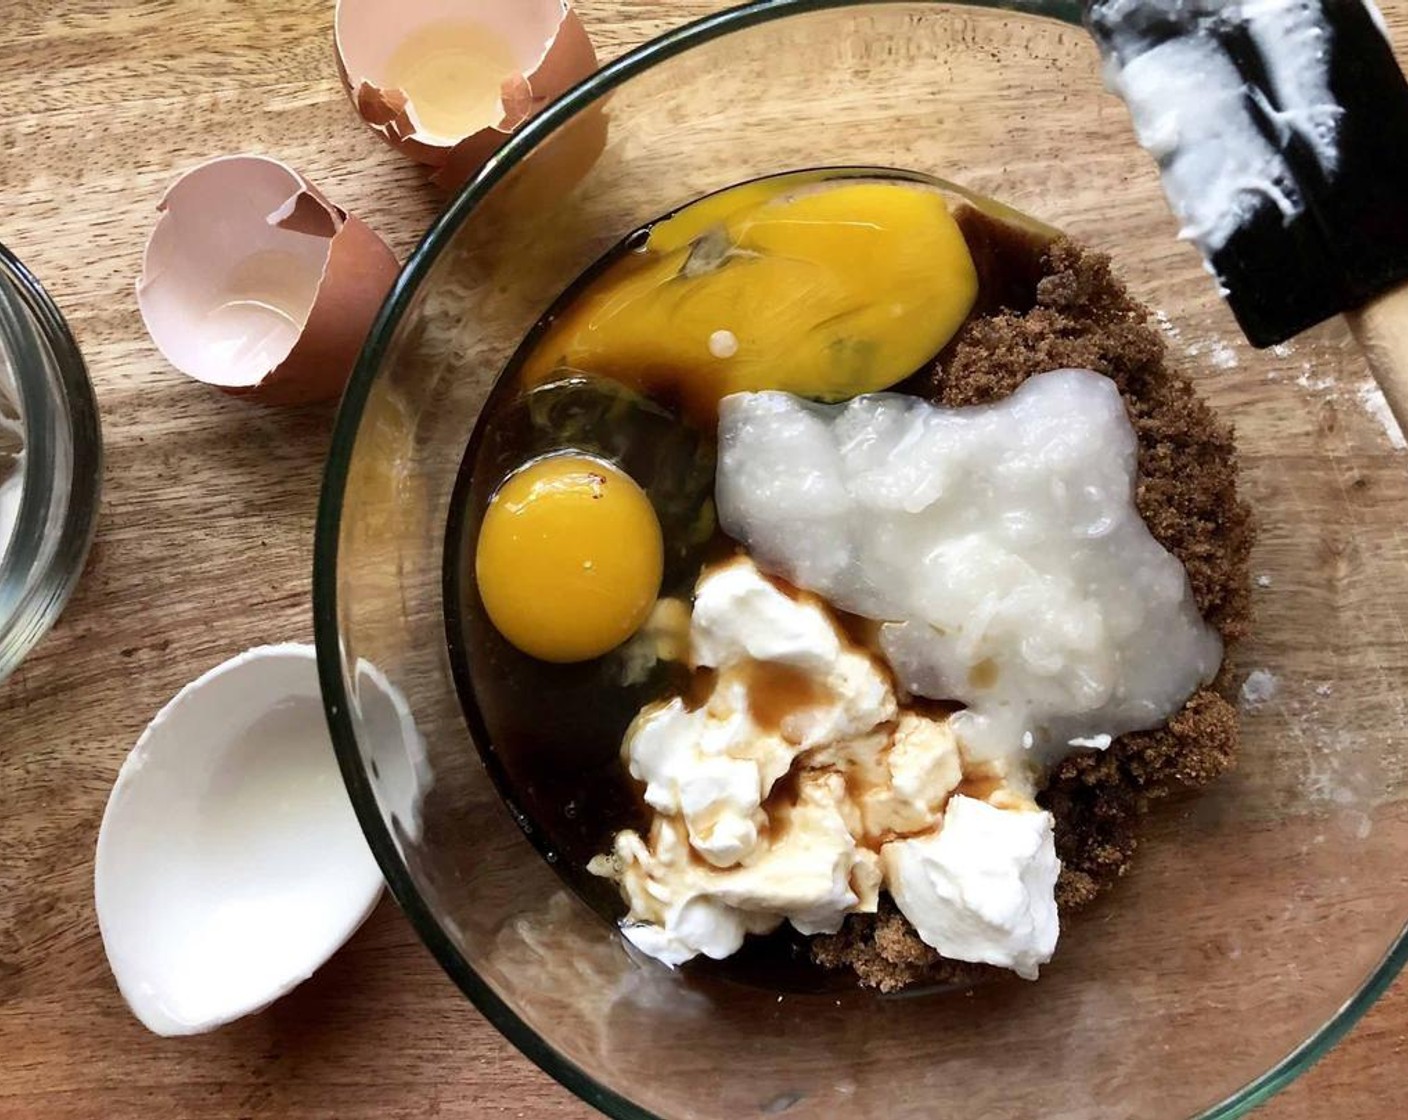 step 5 In a medium bowl, combine the Farmhouse Eggs® Large Brown Eggs (2), Coconut Oil (1/4 cup), Plain Greek Yogurt (1/4 cup), Dark Brown Sugar (1/2 cup) and Pure Vanilla Extract (1 tsp). Whisk until smooth.